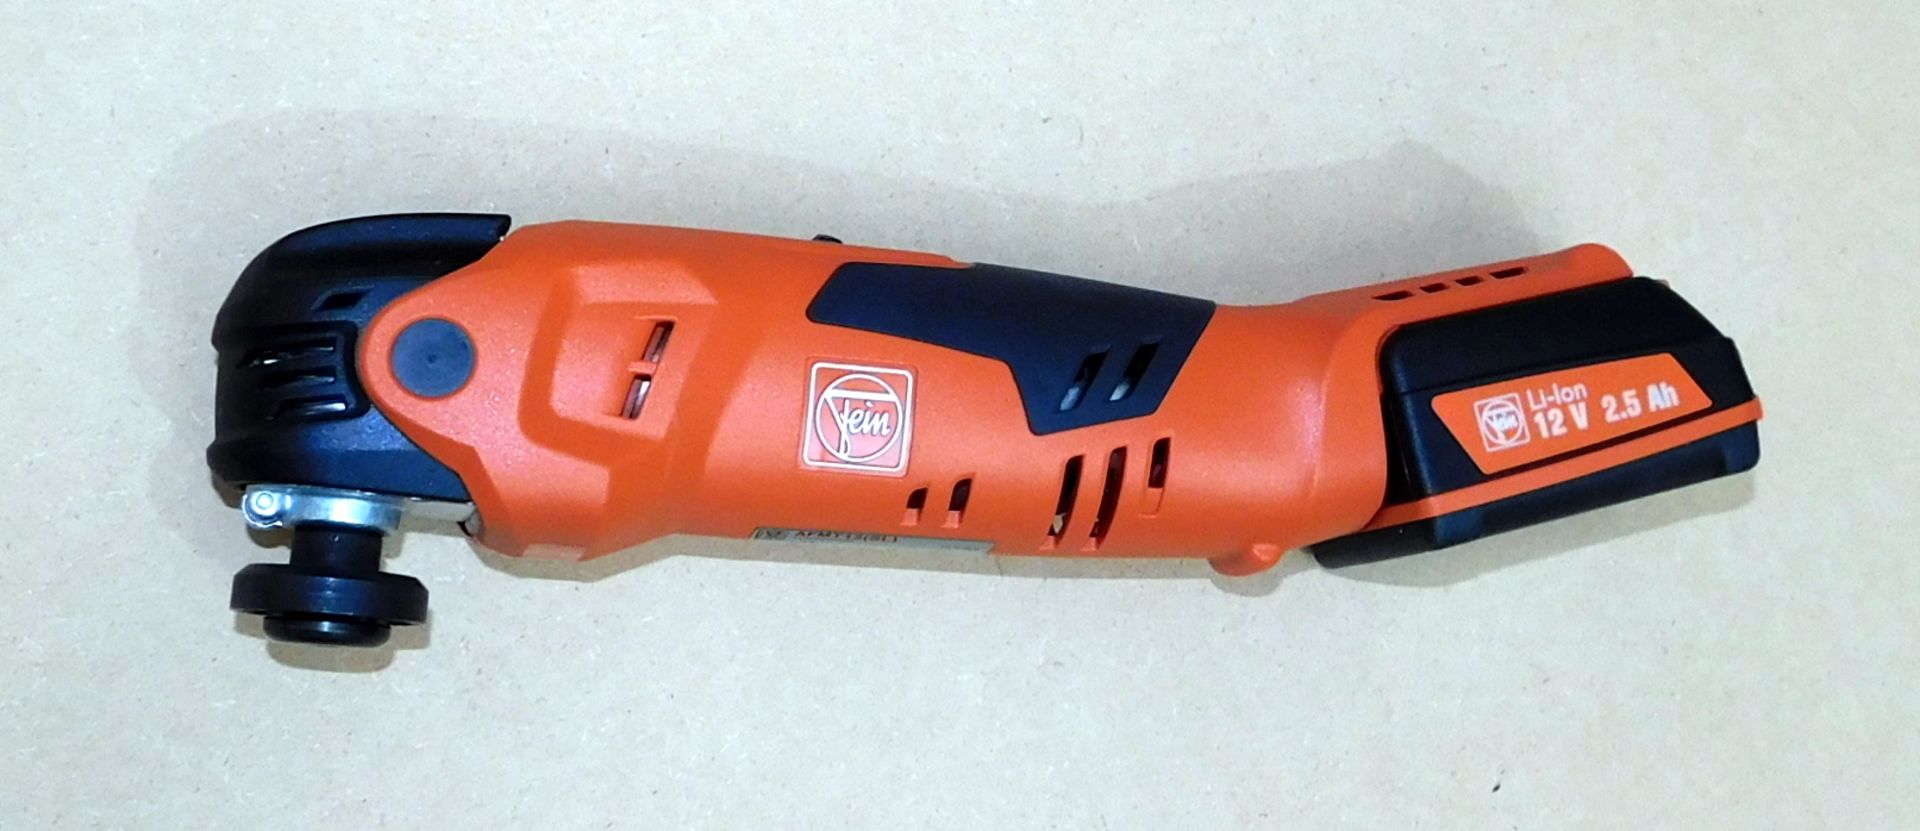 Fein AFMT12(SL) Cordless Multi Talent, With Battery & Charger (New & Boxed) (Located Spelmonden, - Image 2 of 4